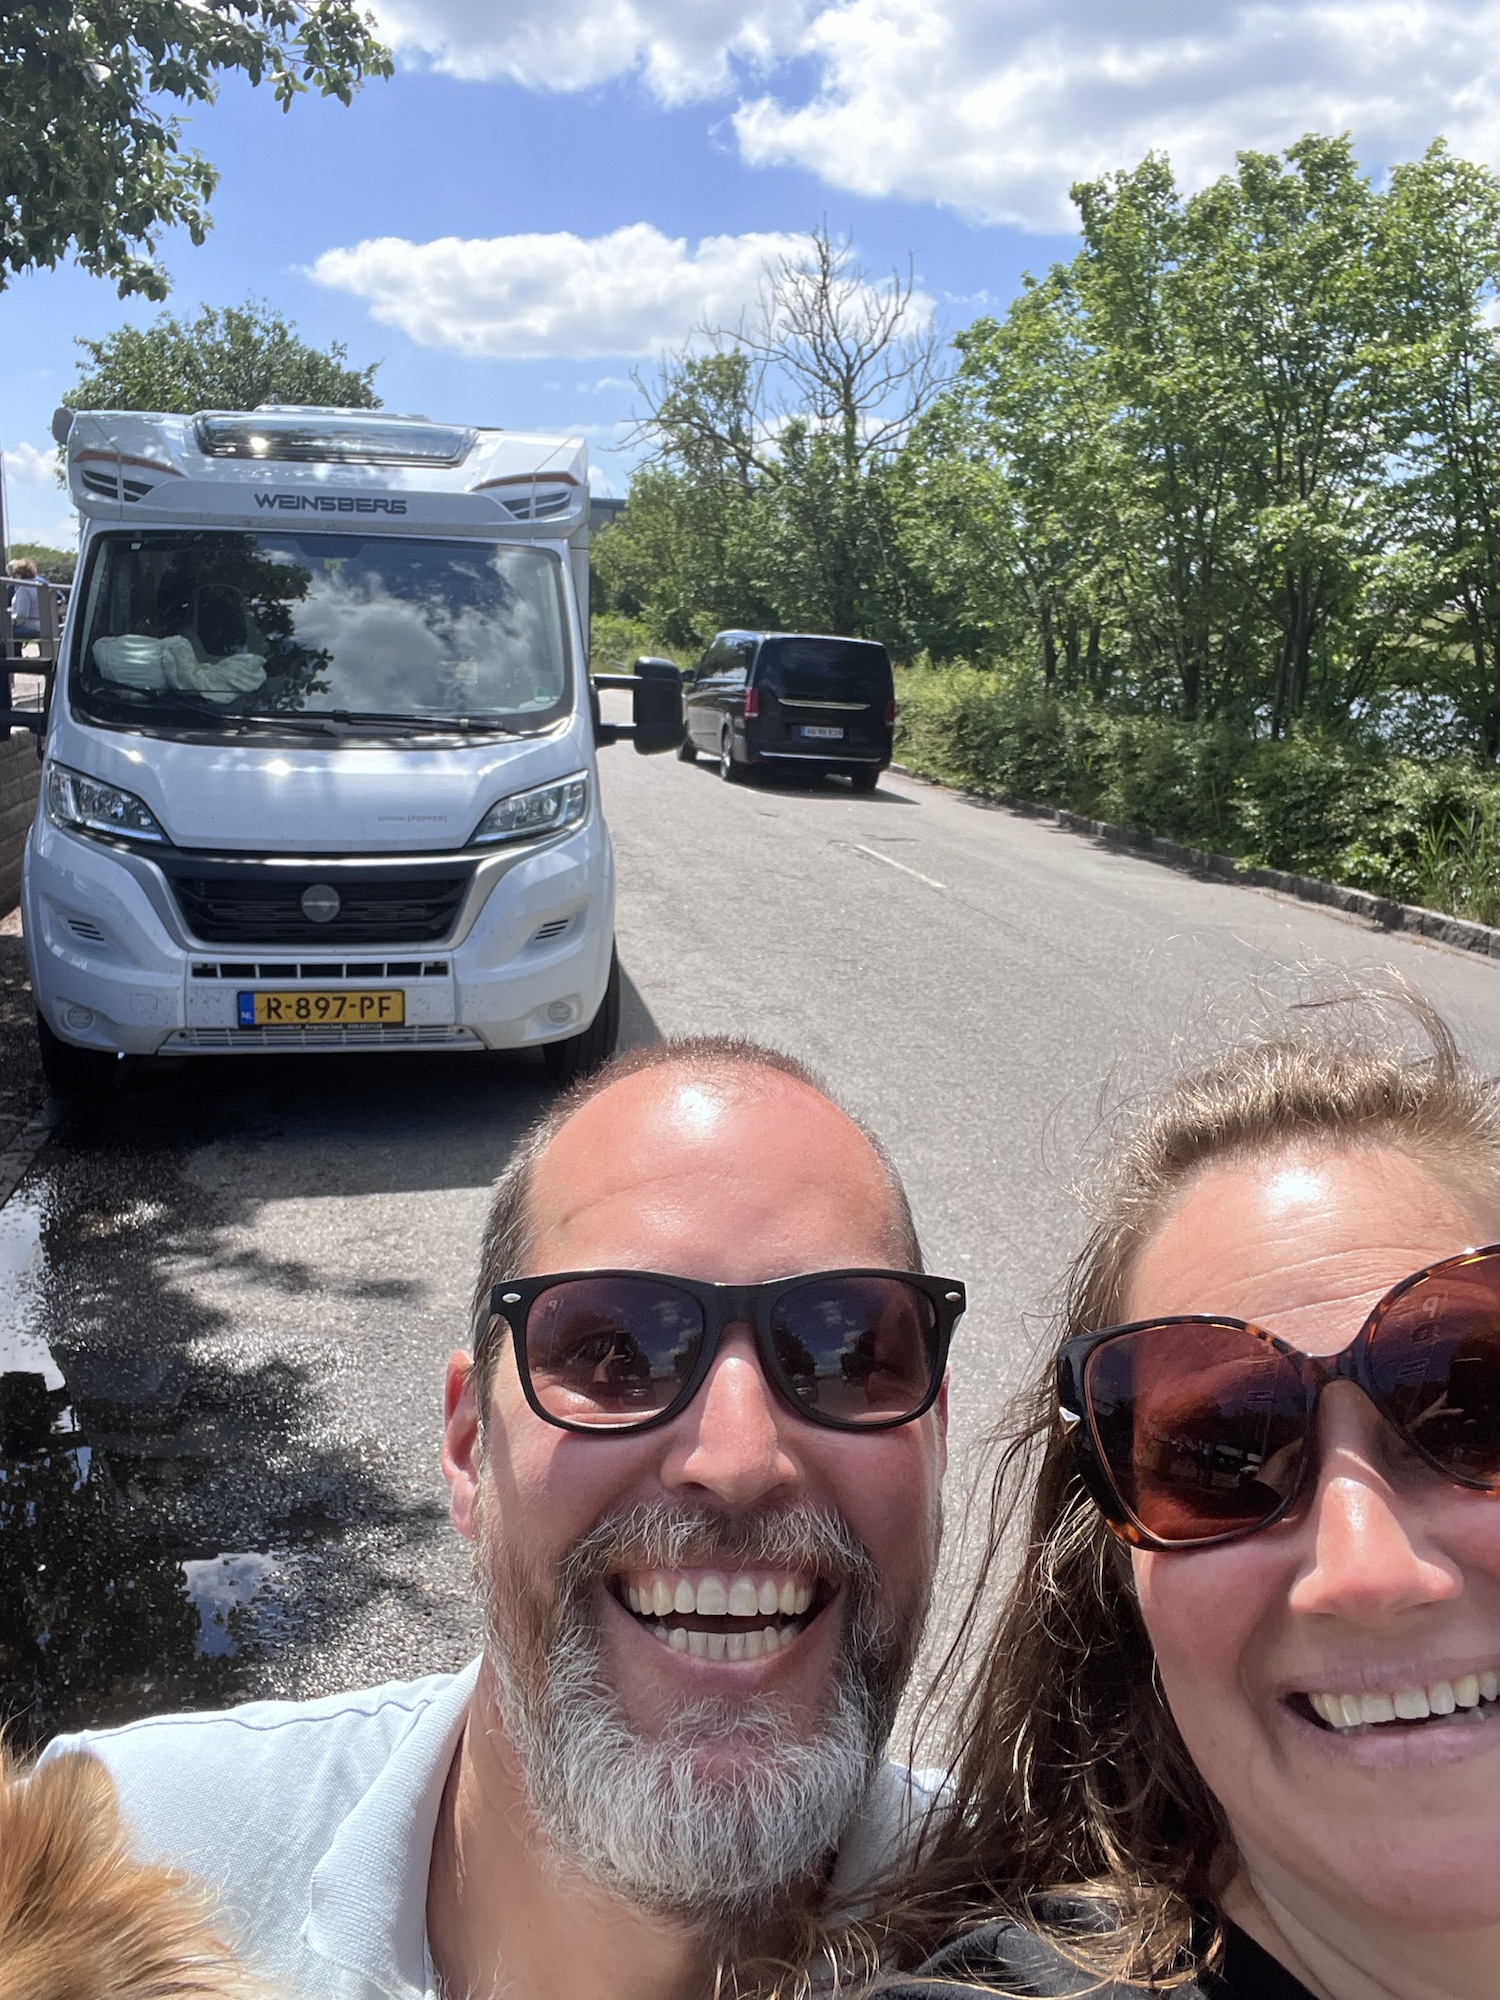 A Day of Travels: From Sweden to Denmark and Germany